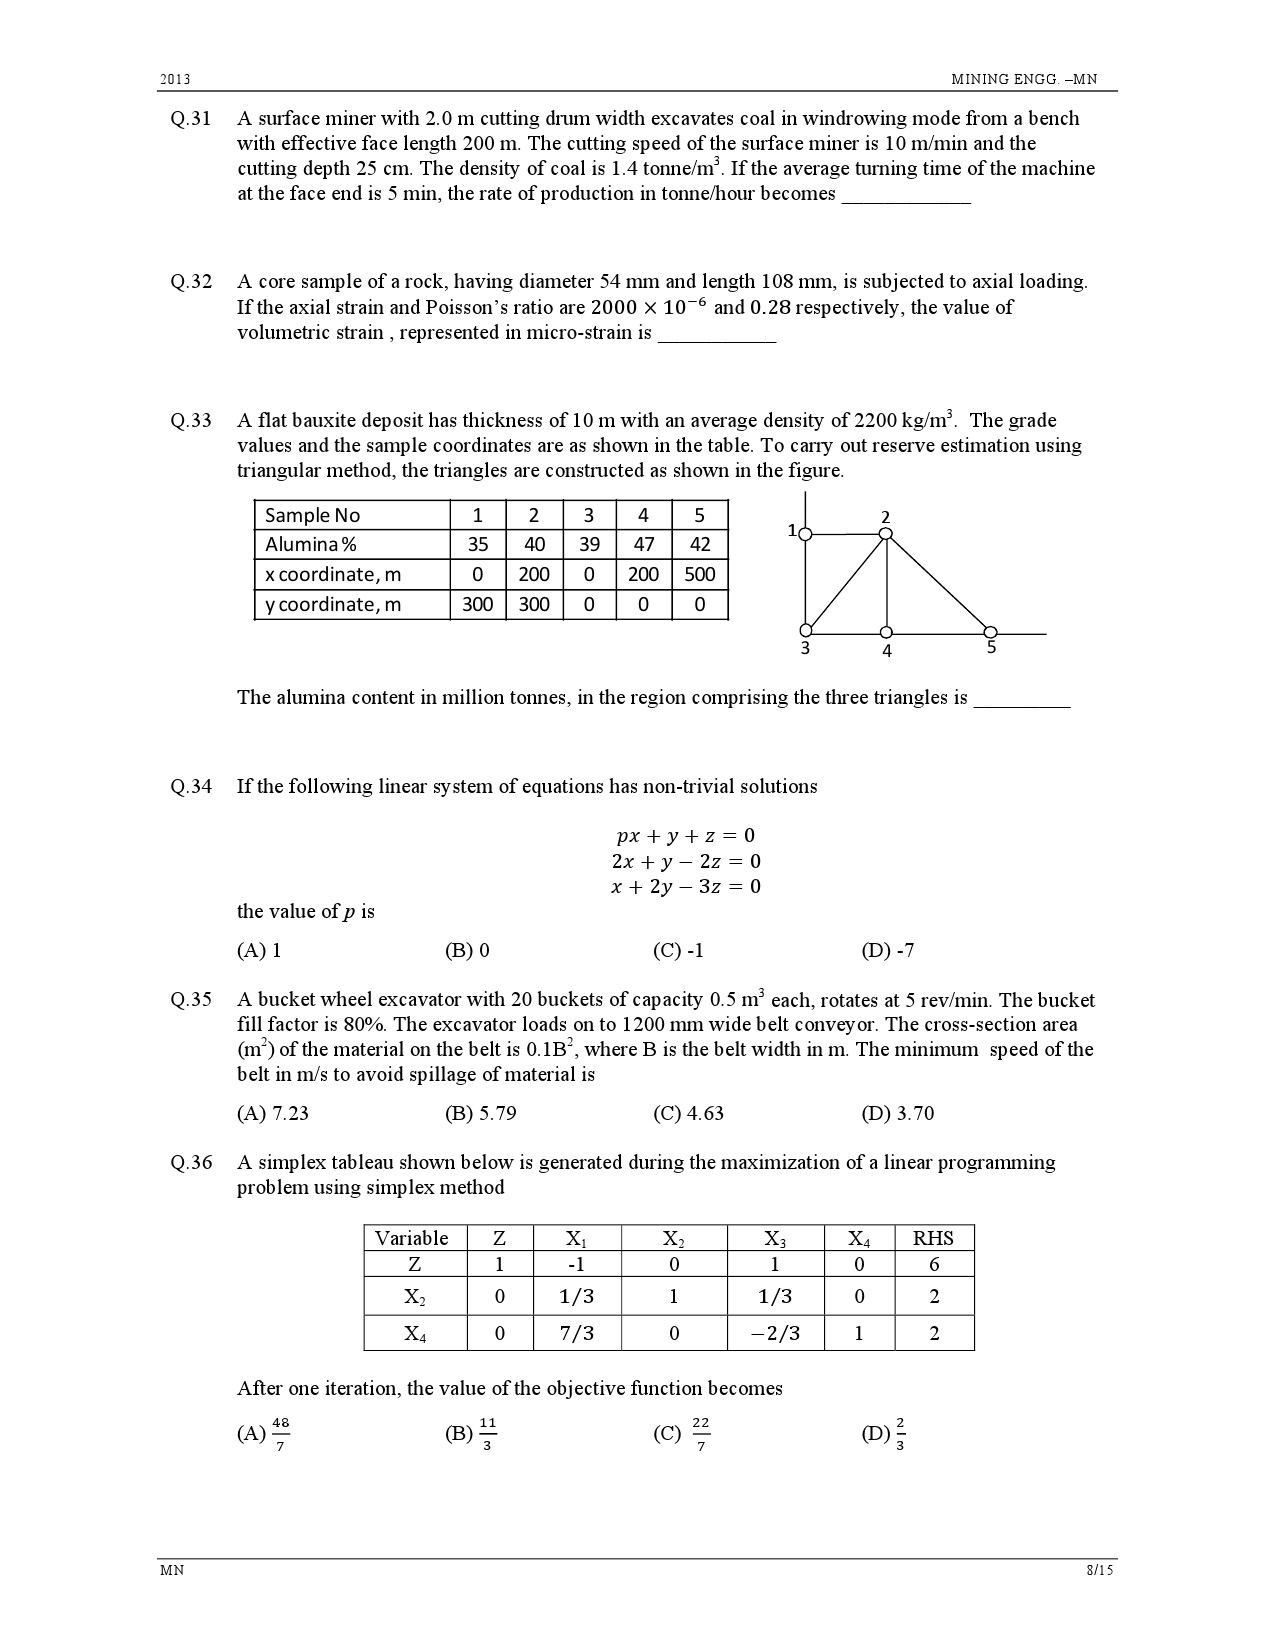 GATE Exam Question Paper 2013 Mining Engineering 8